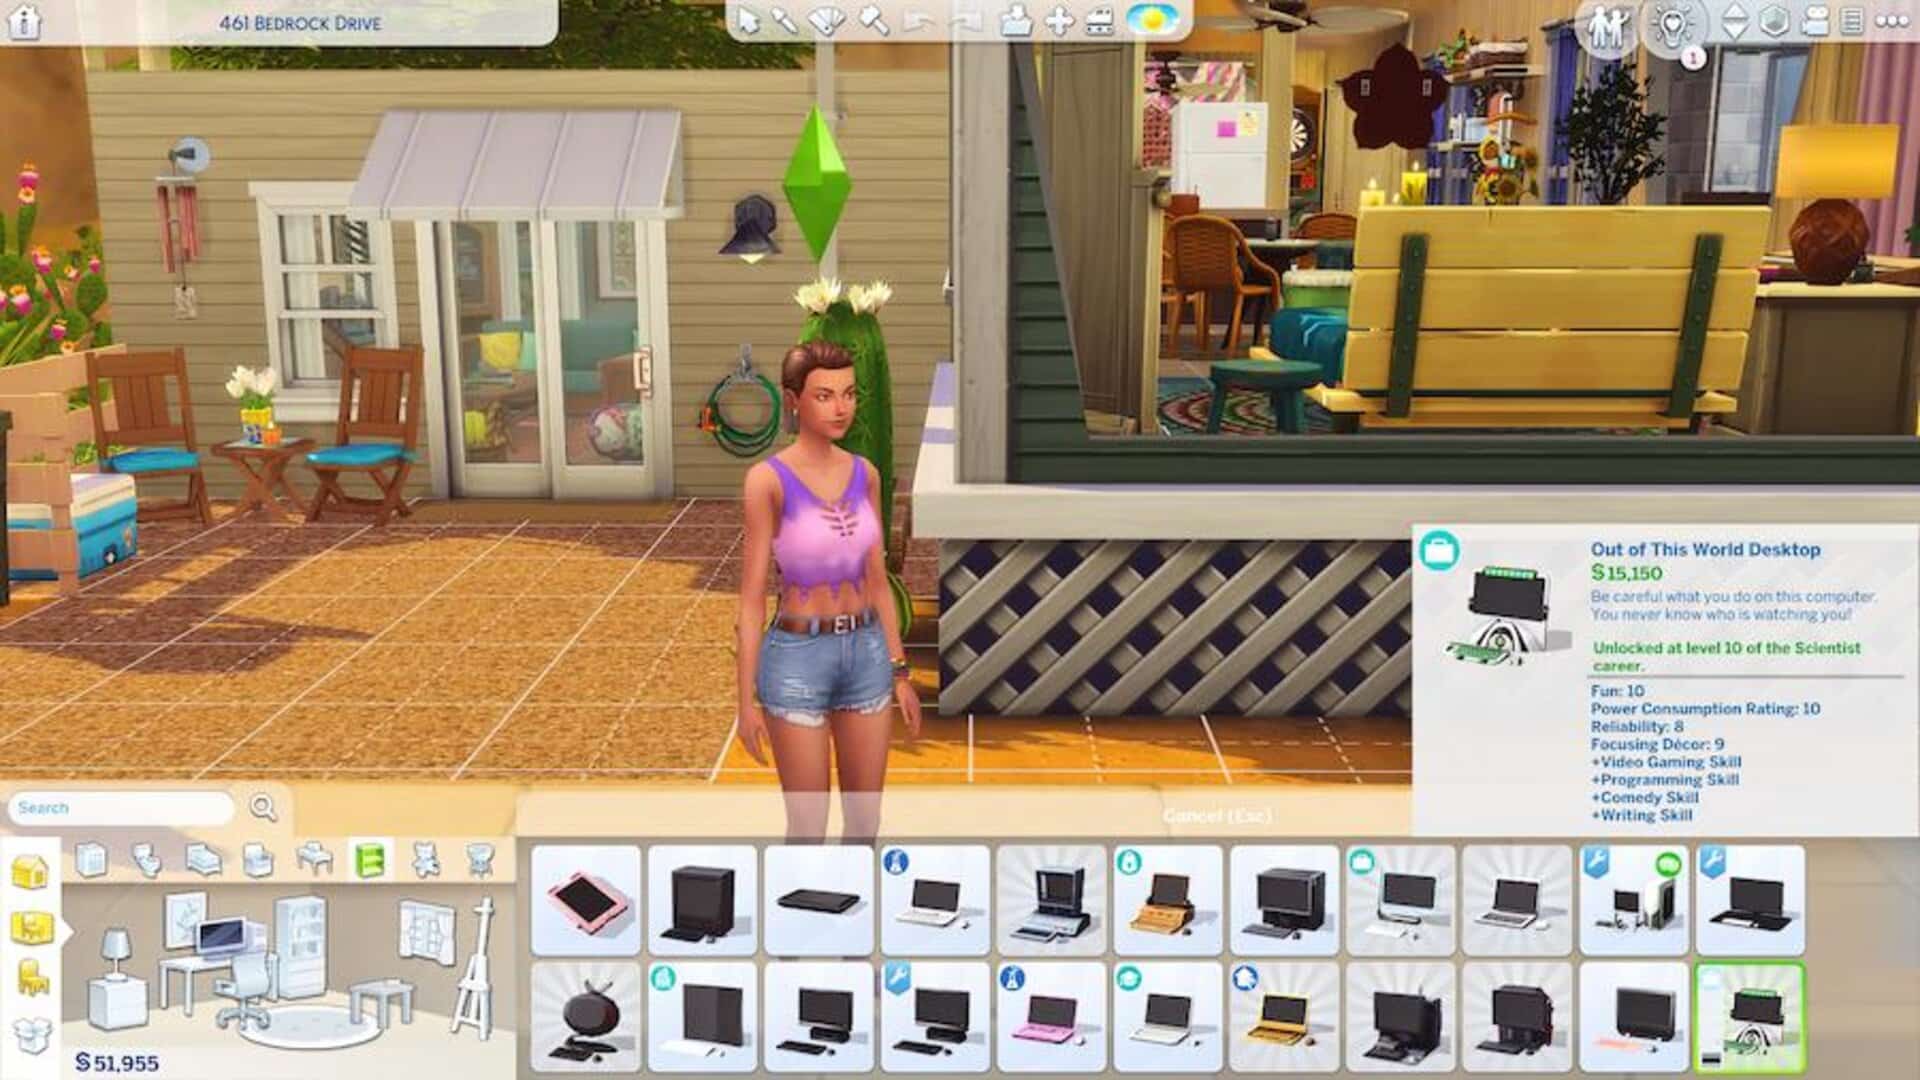 How to Unlock Career Items in The Sims 4 unlock with cheats